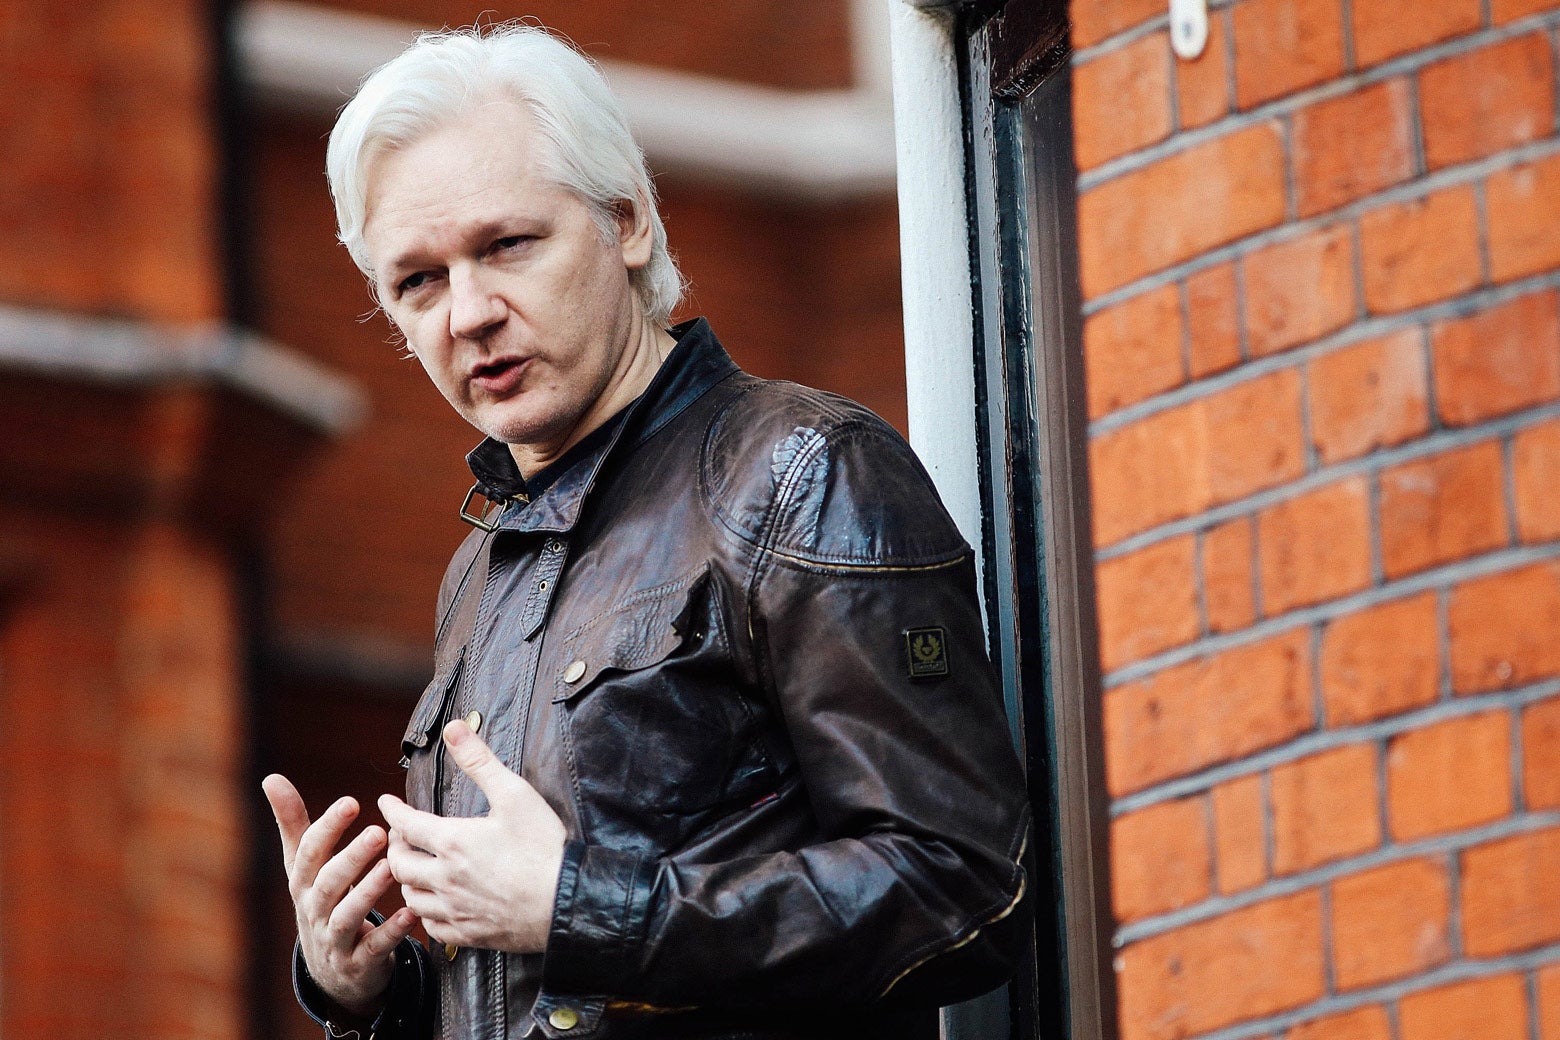 Julian Assange speaks to the media from the balcony of the Embassy of Ecuador on May 19 in London.